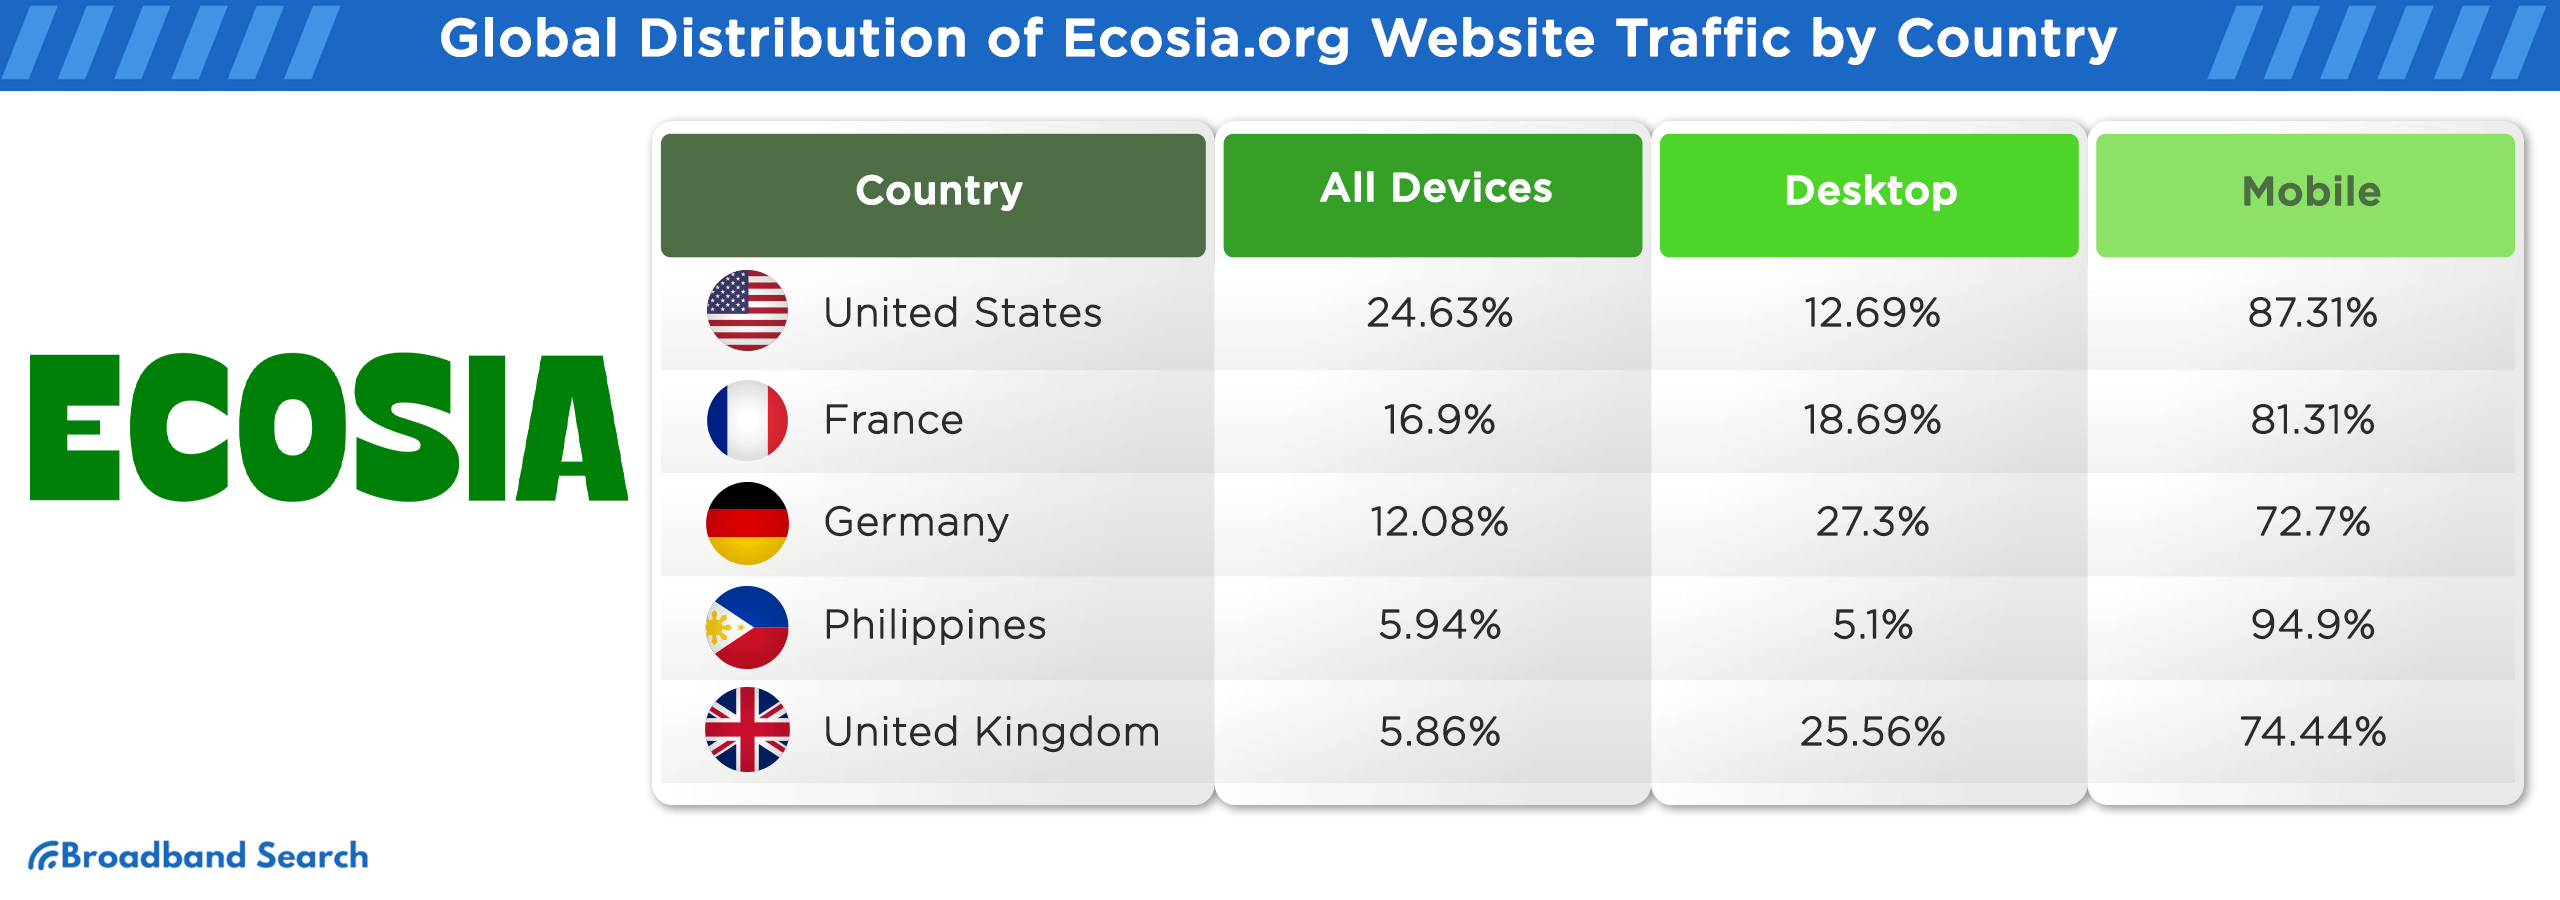 Global Distribution of ecosia.org website traffic by country